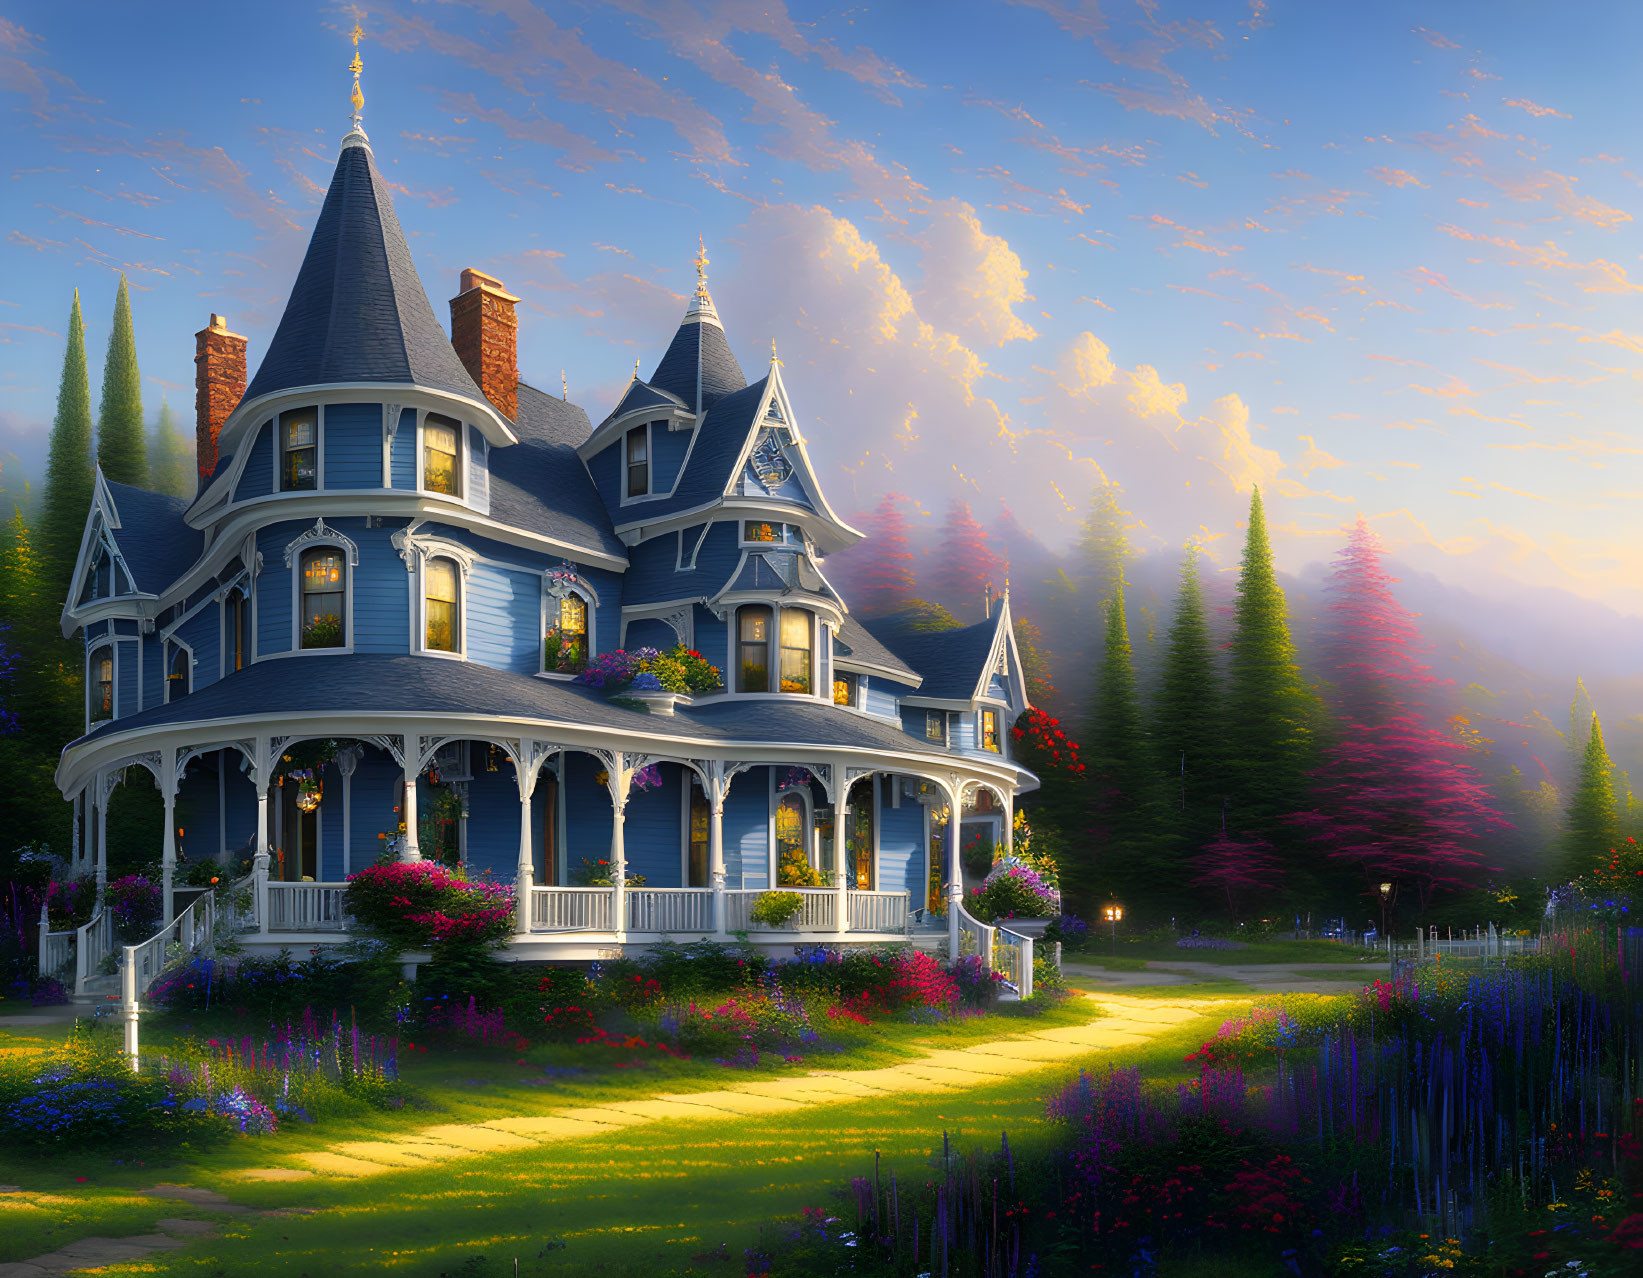 Victorian-style house with wraparound porch in lush garden at sunset